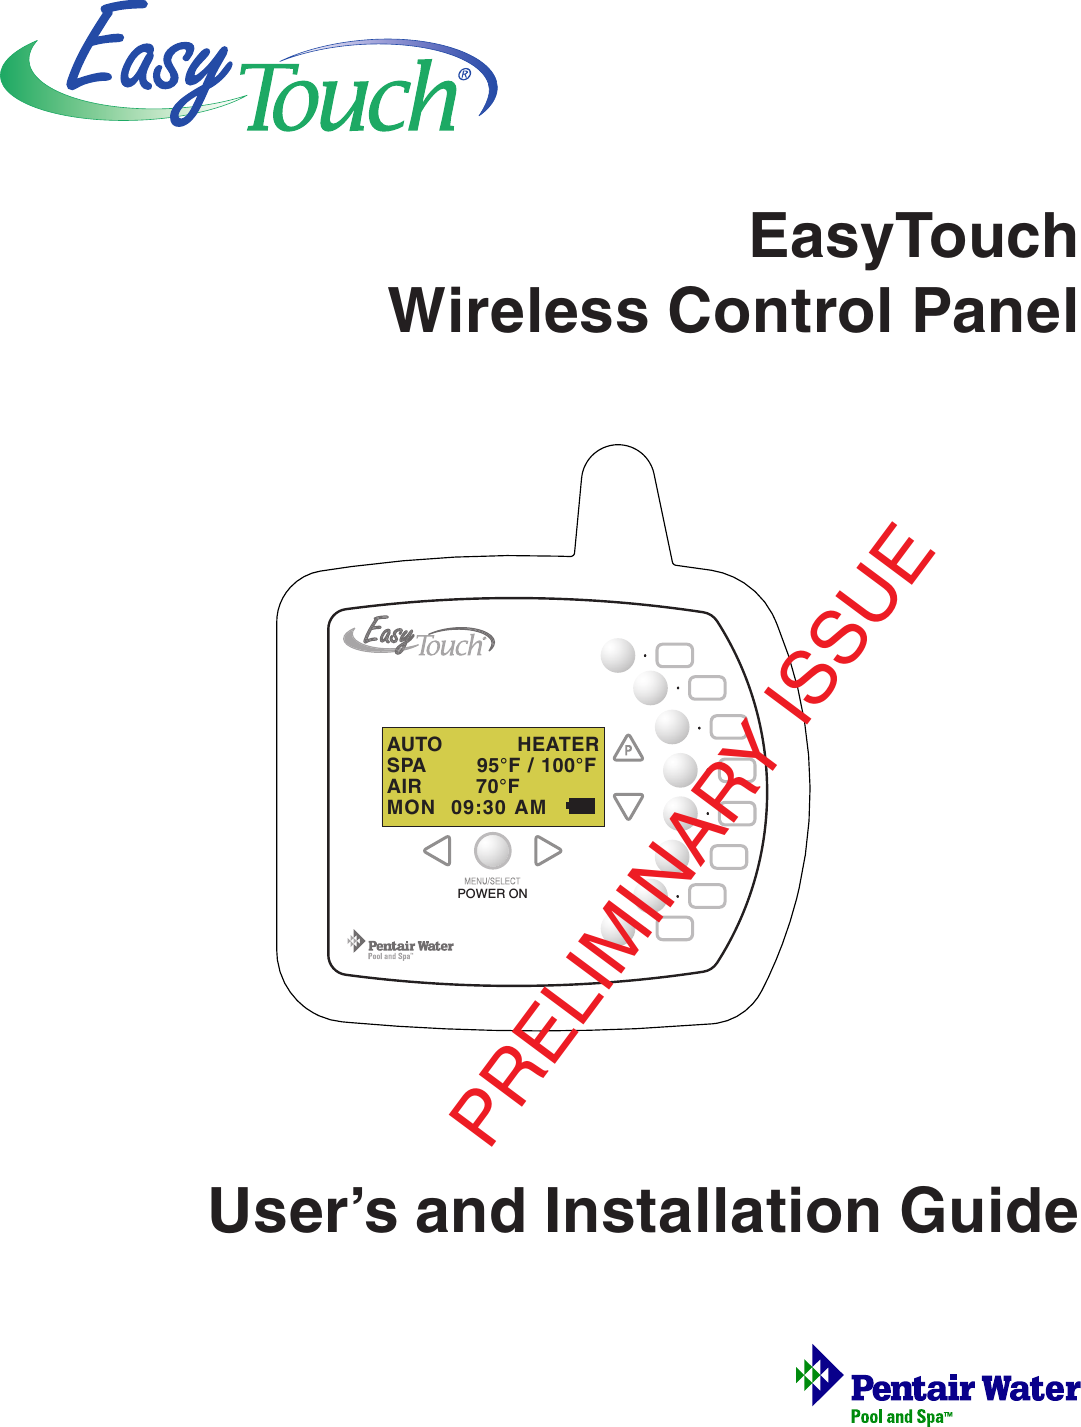 EasyTouchWireless Control PanelUser’s and Installation GuideAUTO           HEATERSPA       95°F / 100°FAIR        70°FMON  09:30 AMPOWER ONPRELIMINARY ISSUE